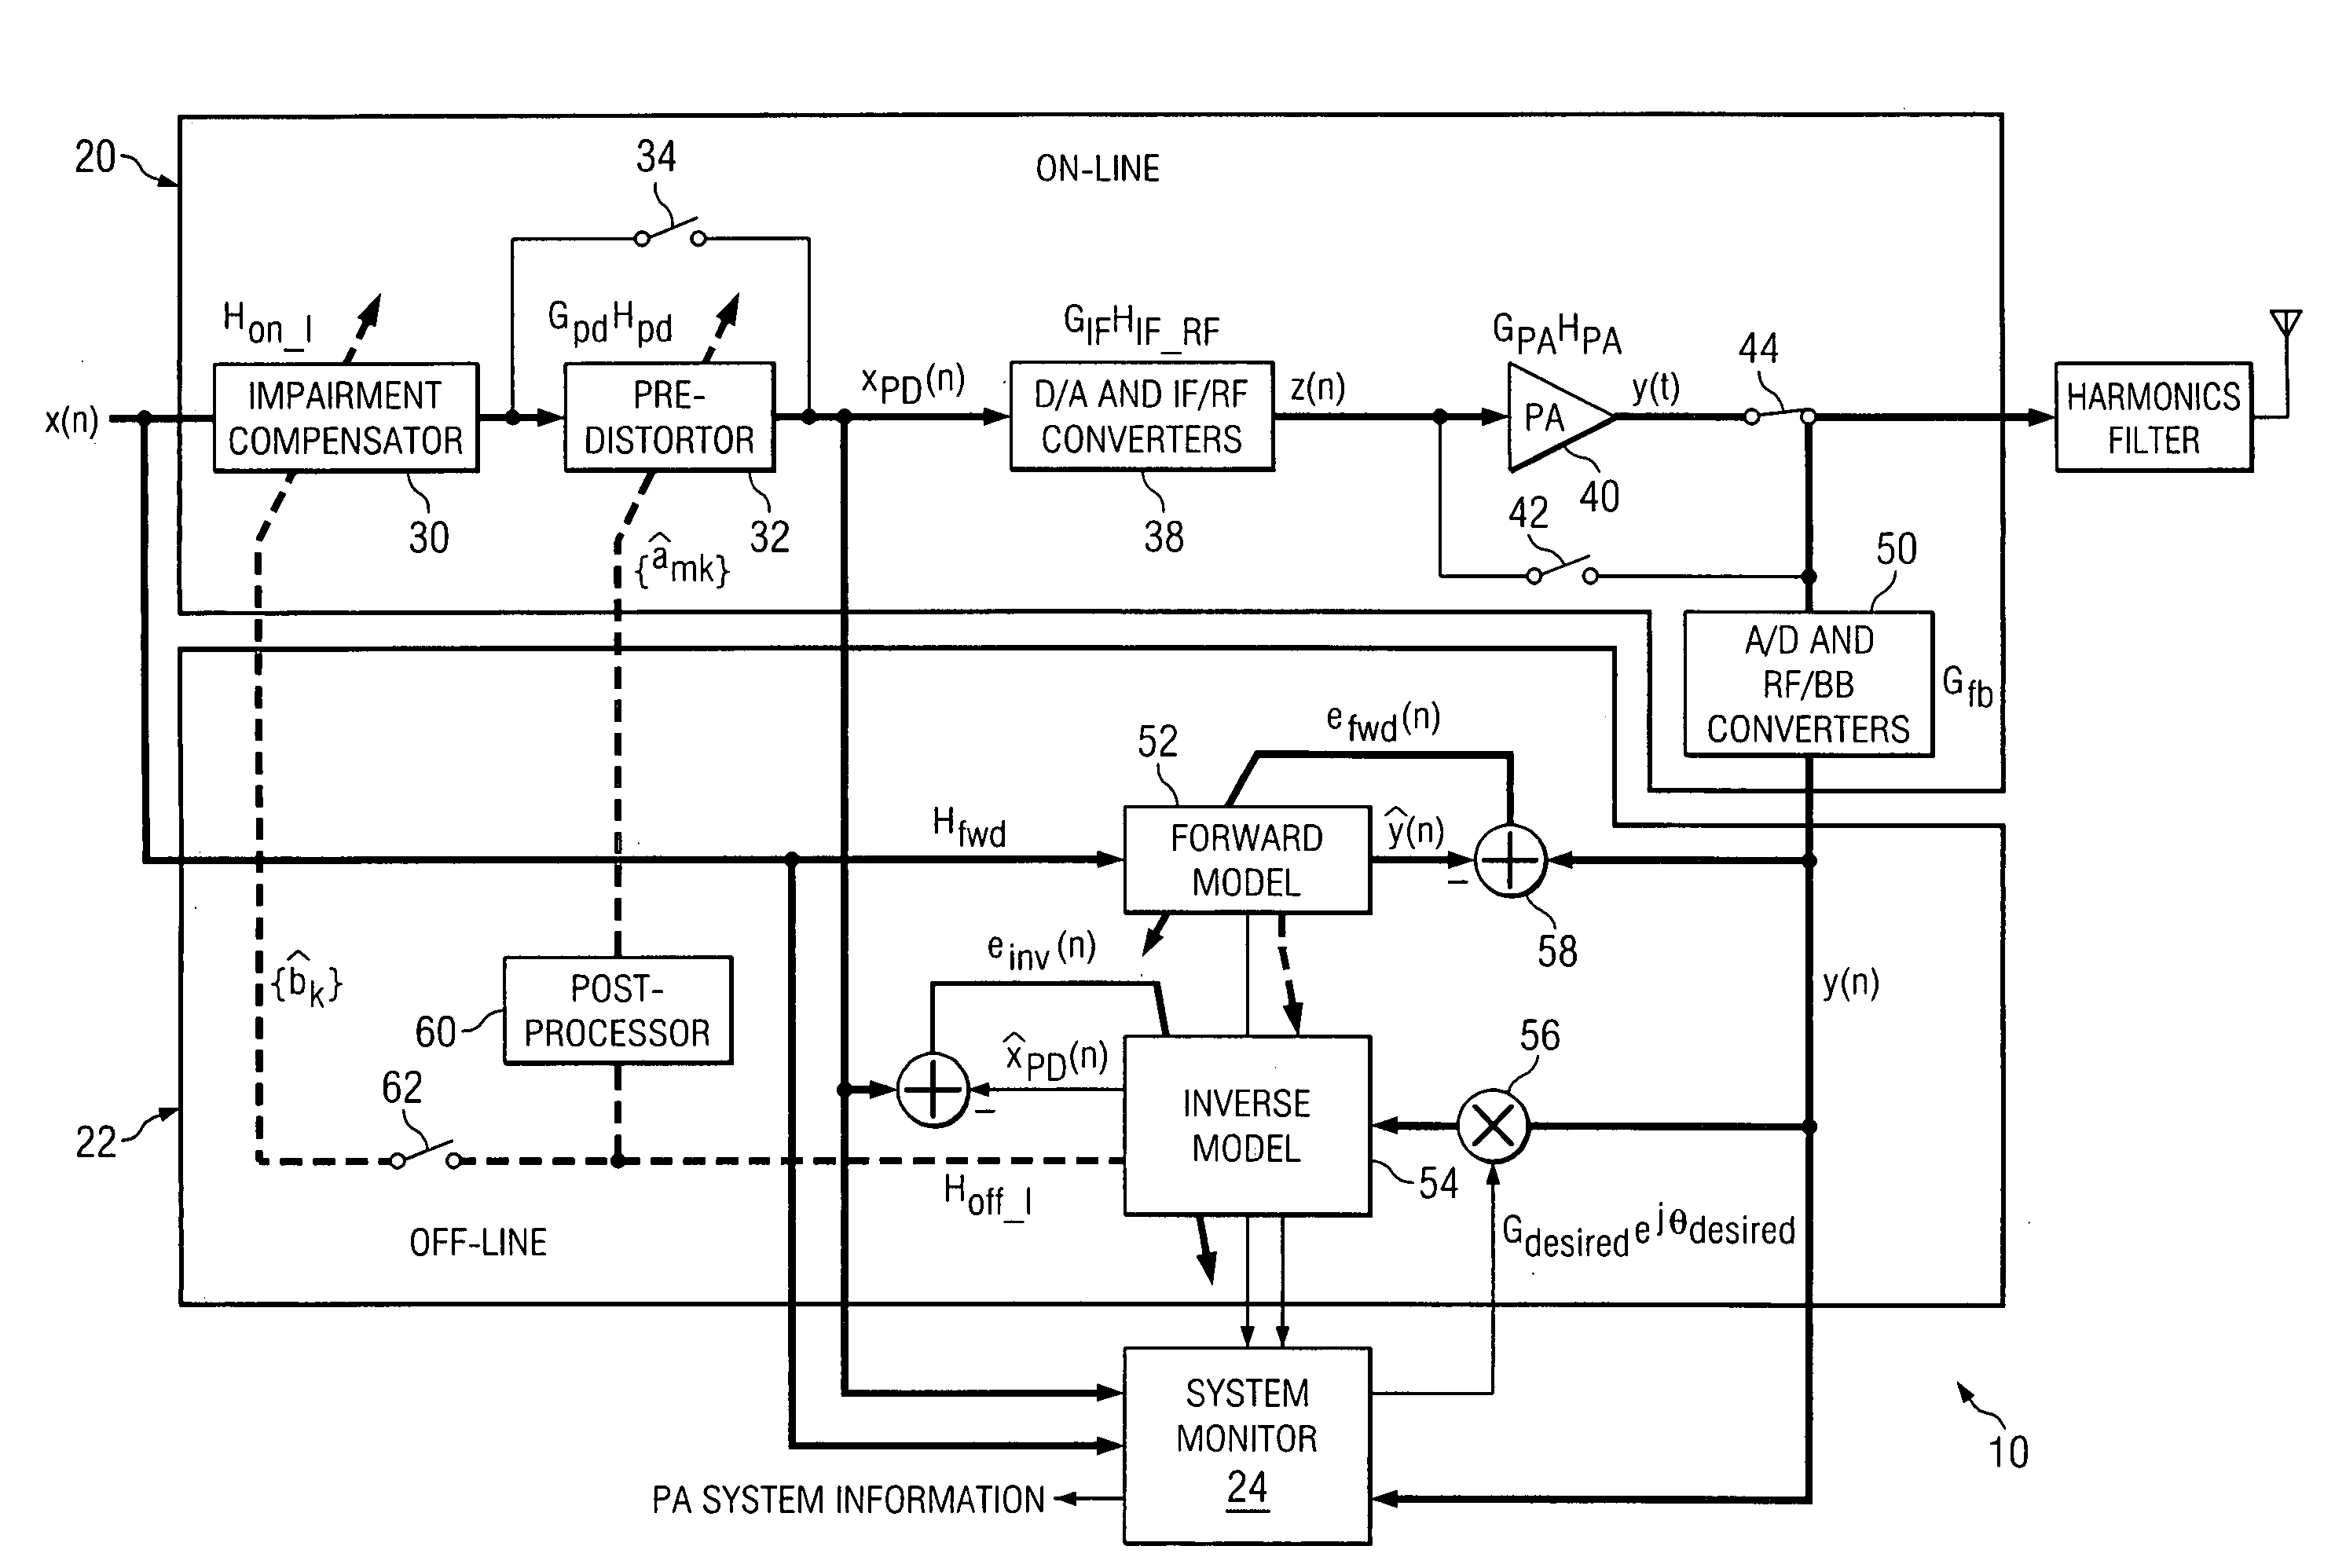 Performing remote power amplifier linearization